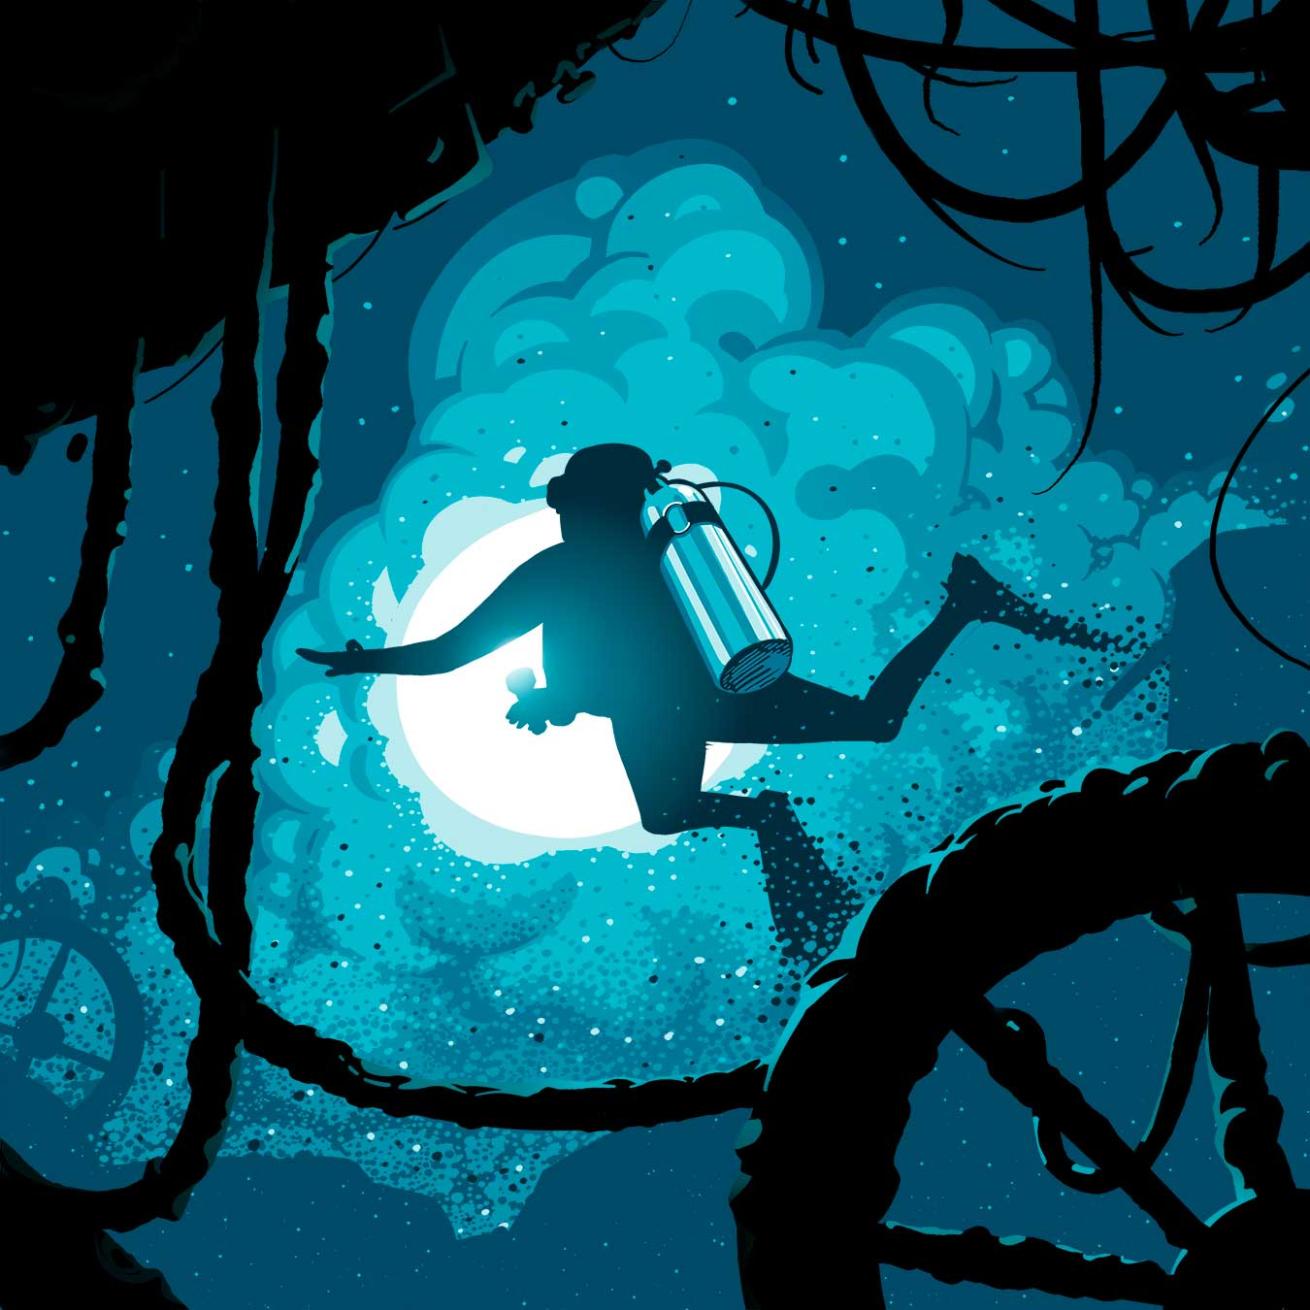 An illustration of a diver in a shipwreck